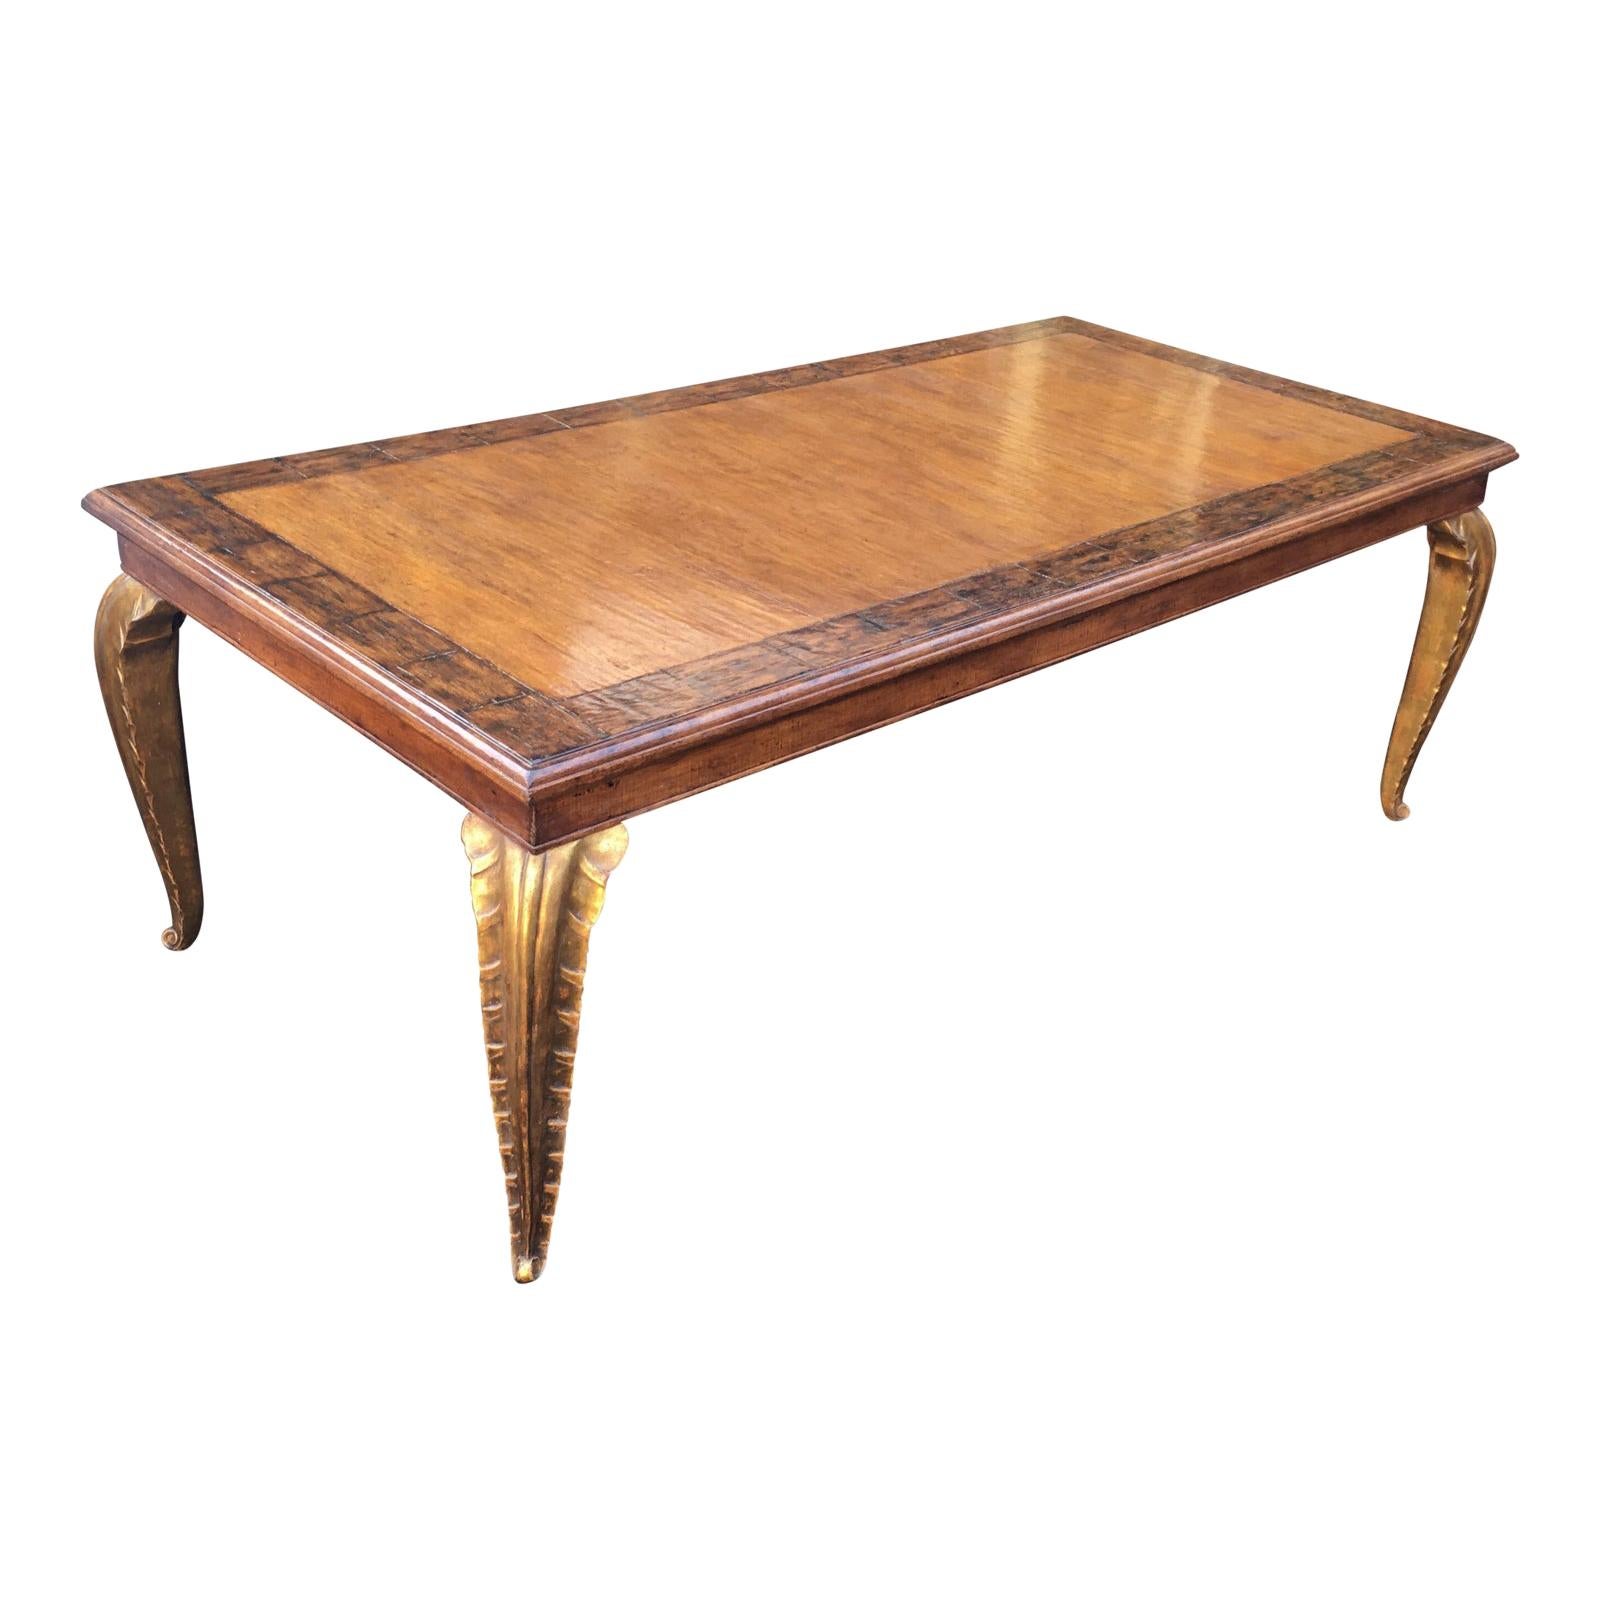 Carved French Dining Table with Giltwood Palm Leaf Legs by Randy Esada